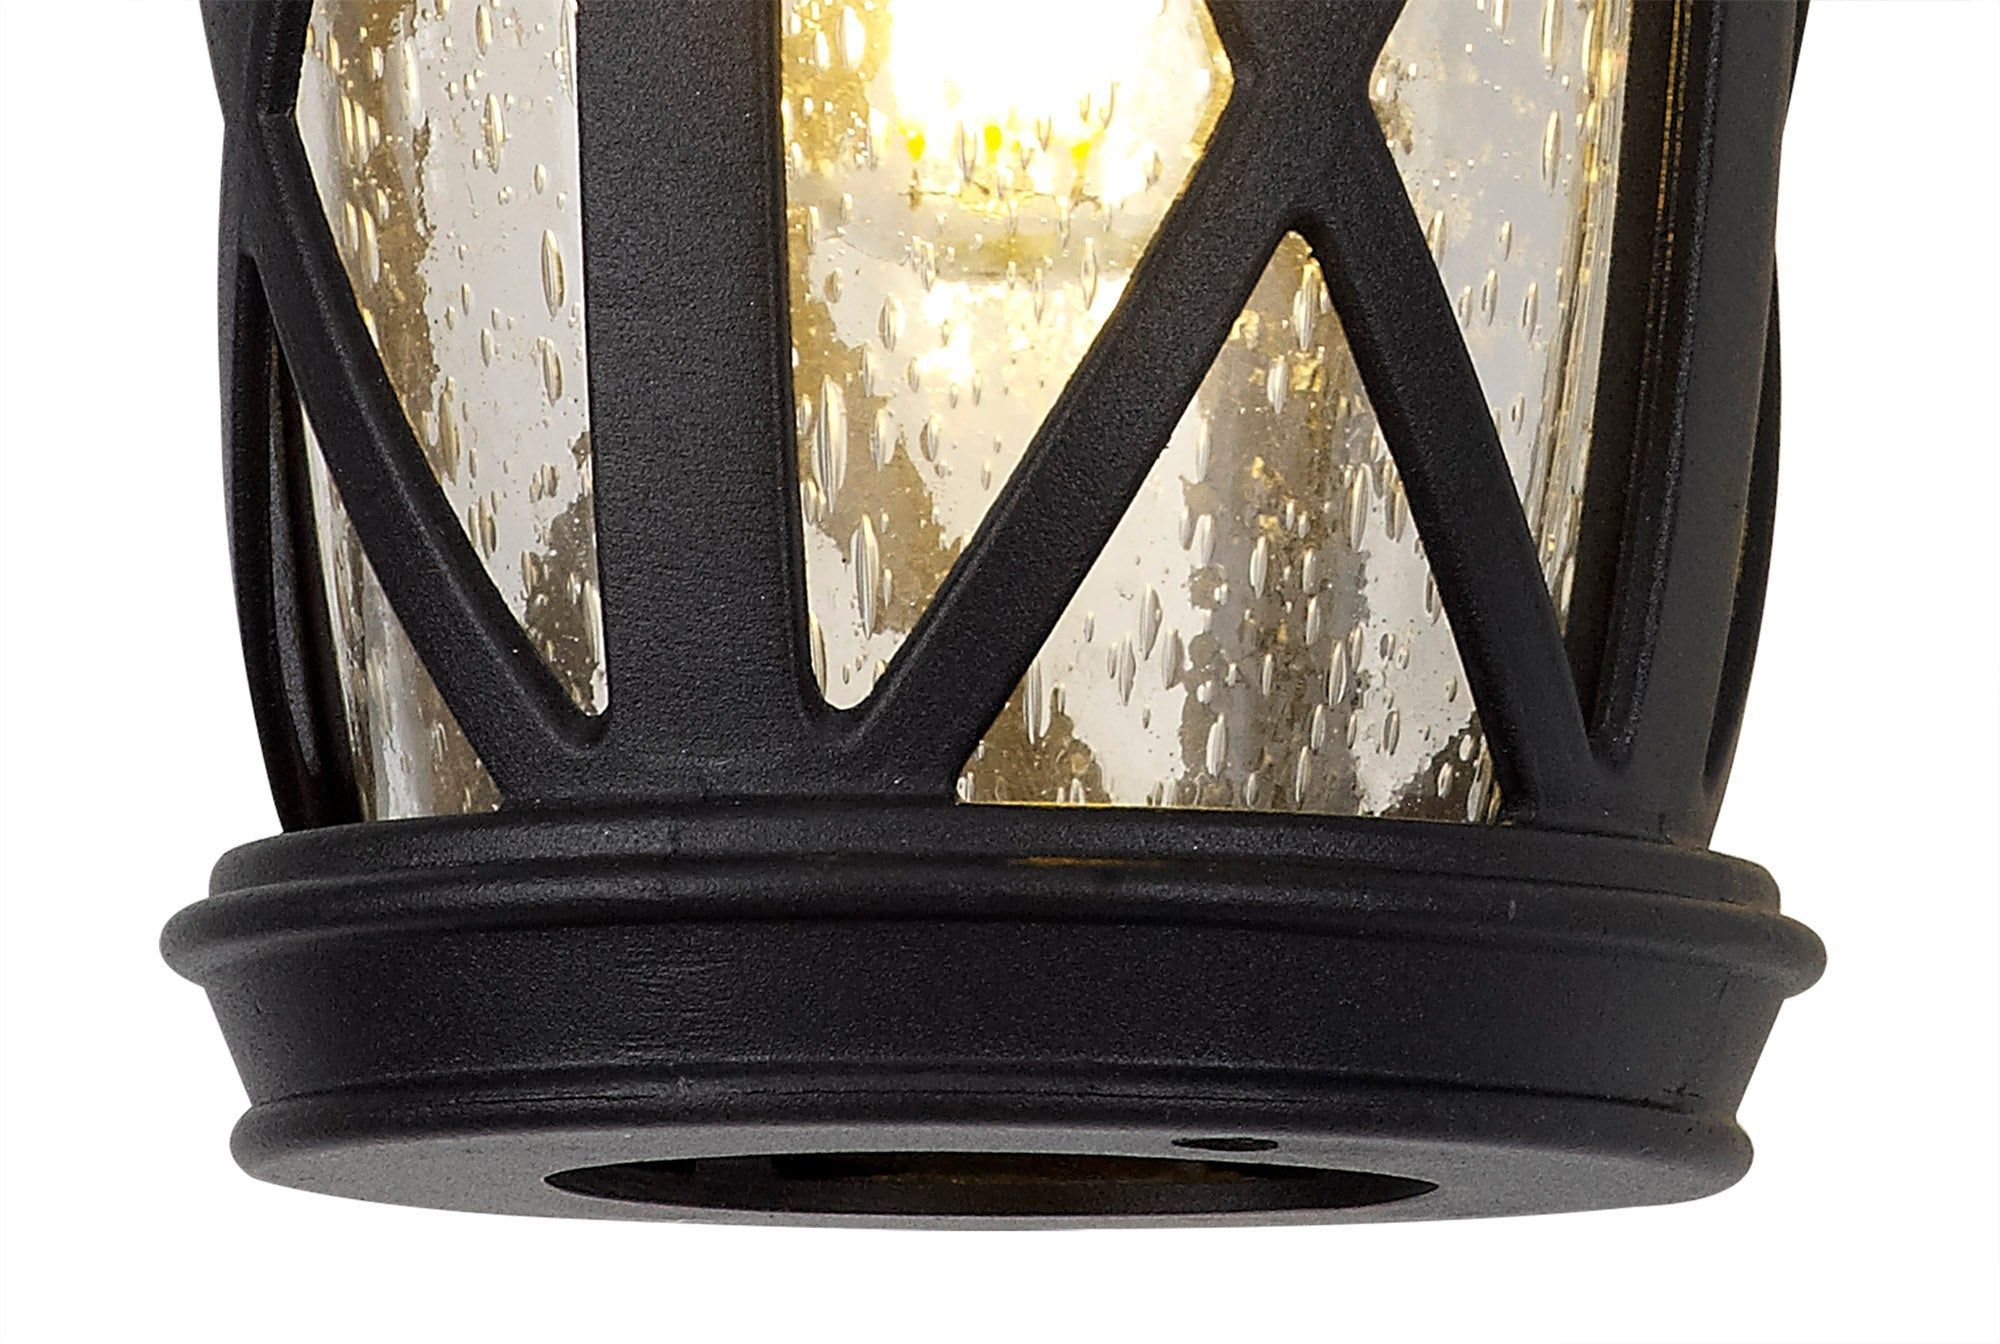 Alcovr Down Round Criss Cross Outdoor Wall Lamp, 1 x E27, IP44, Sand Black/Clear Seeded Glass, 2yrs Warranty